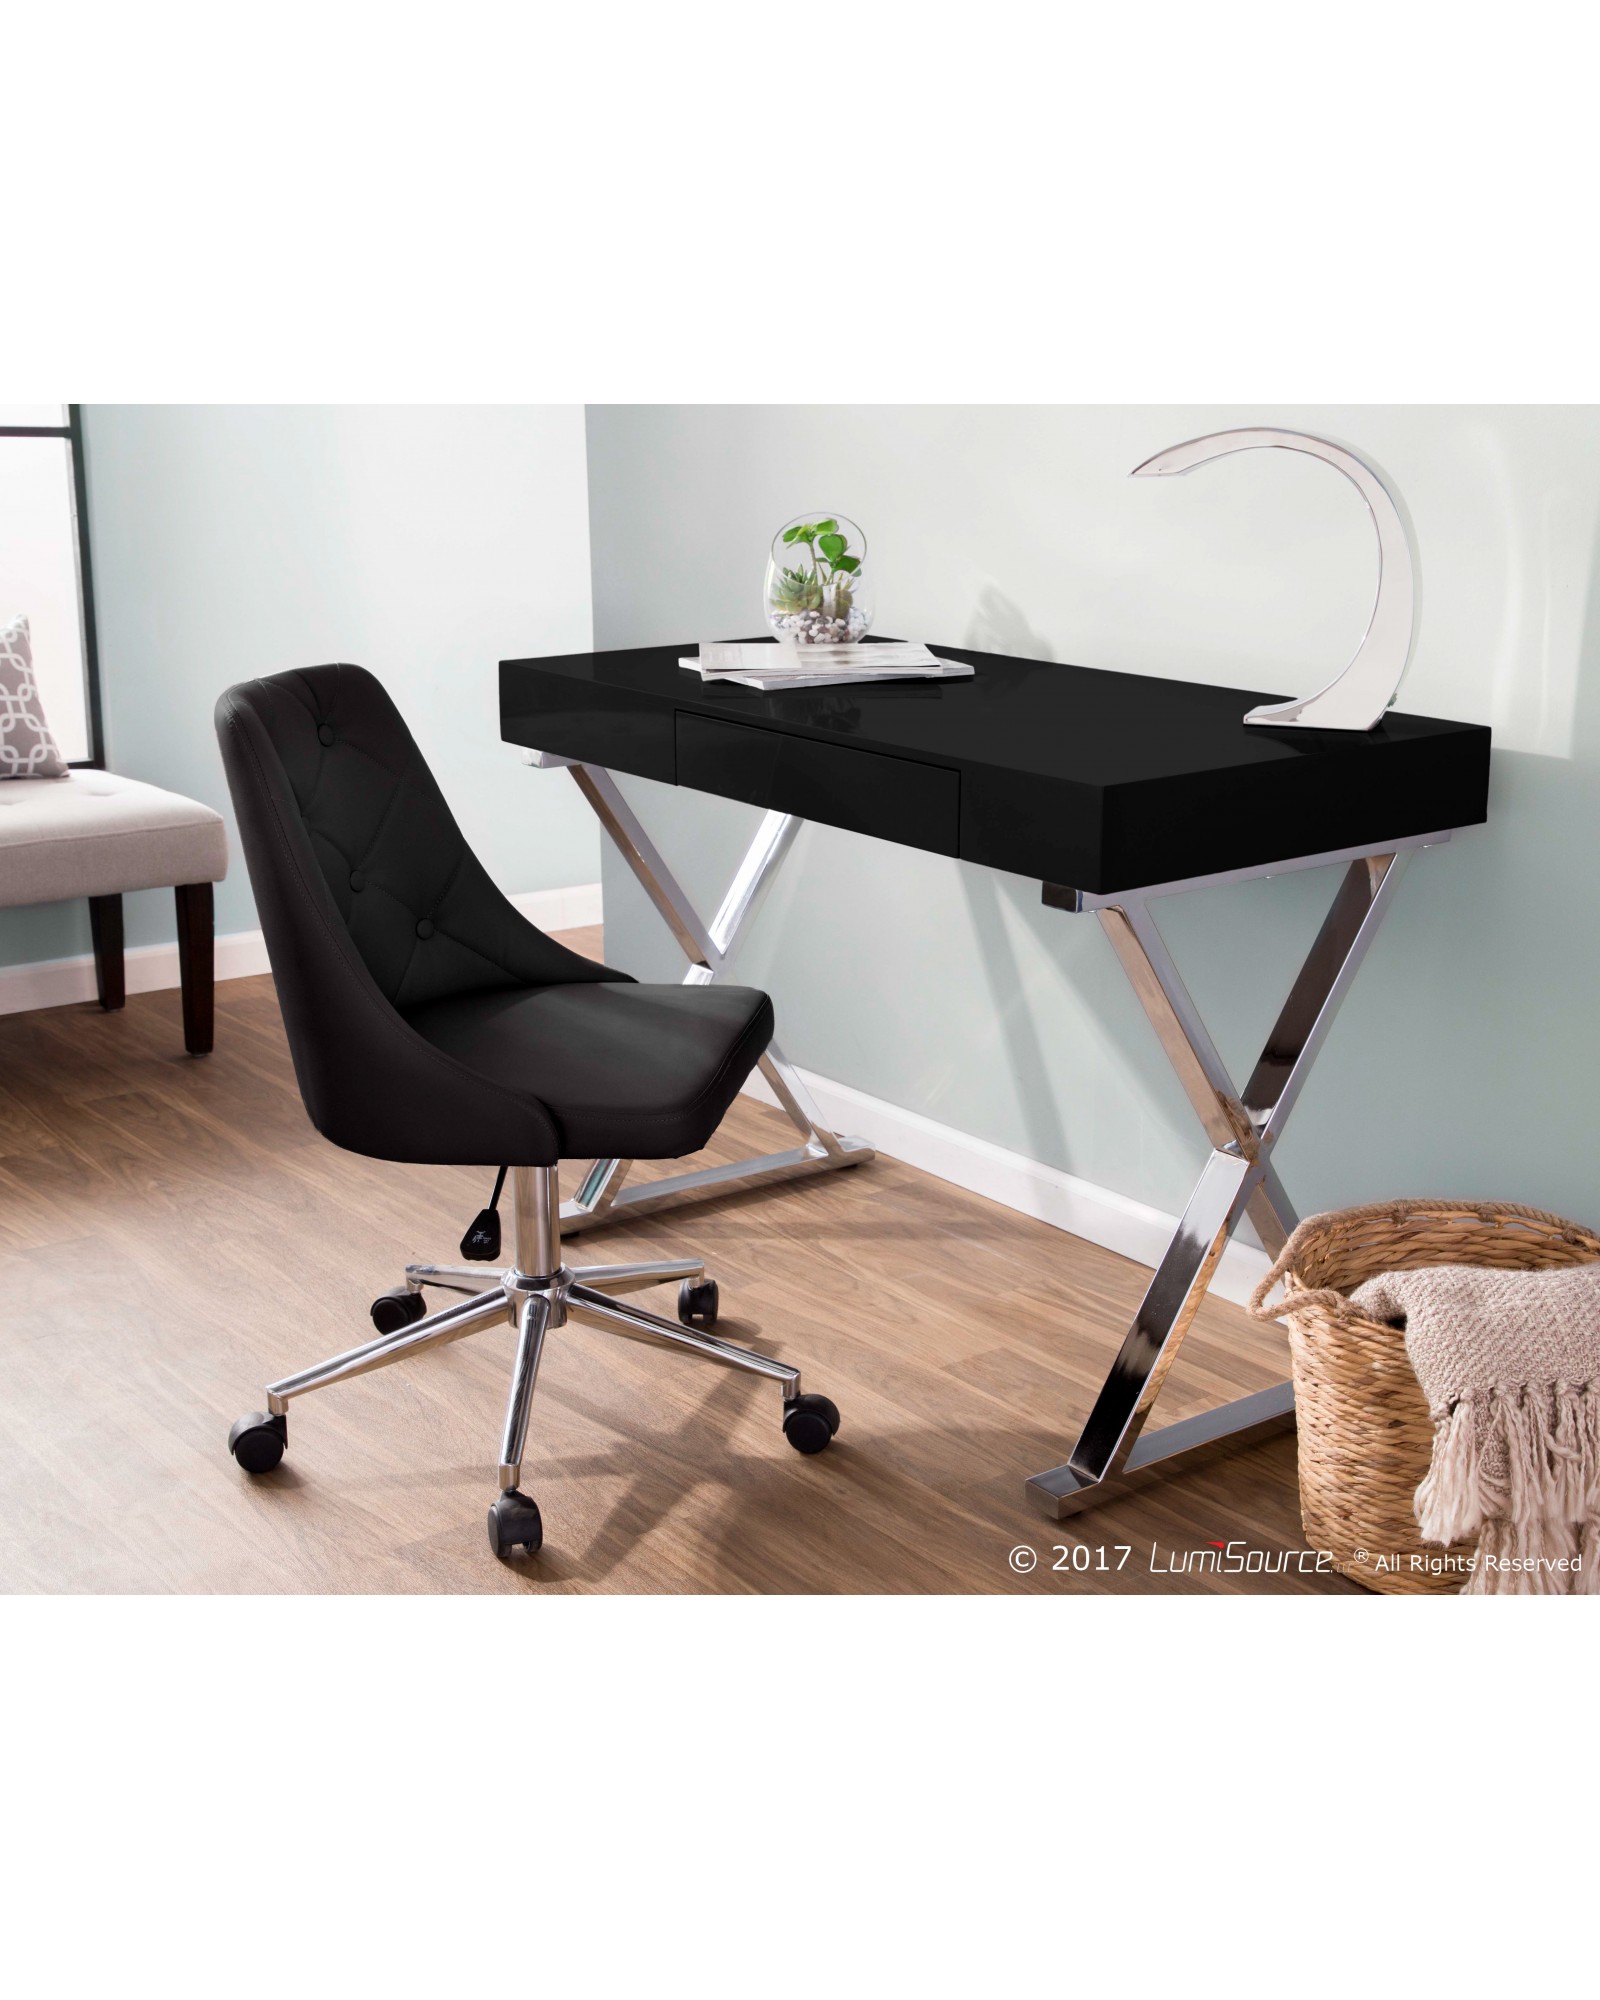 Marche Contemporary Adjustable Office Chair with Swivel in Black Faux Leather